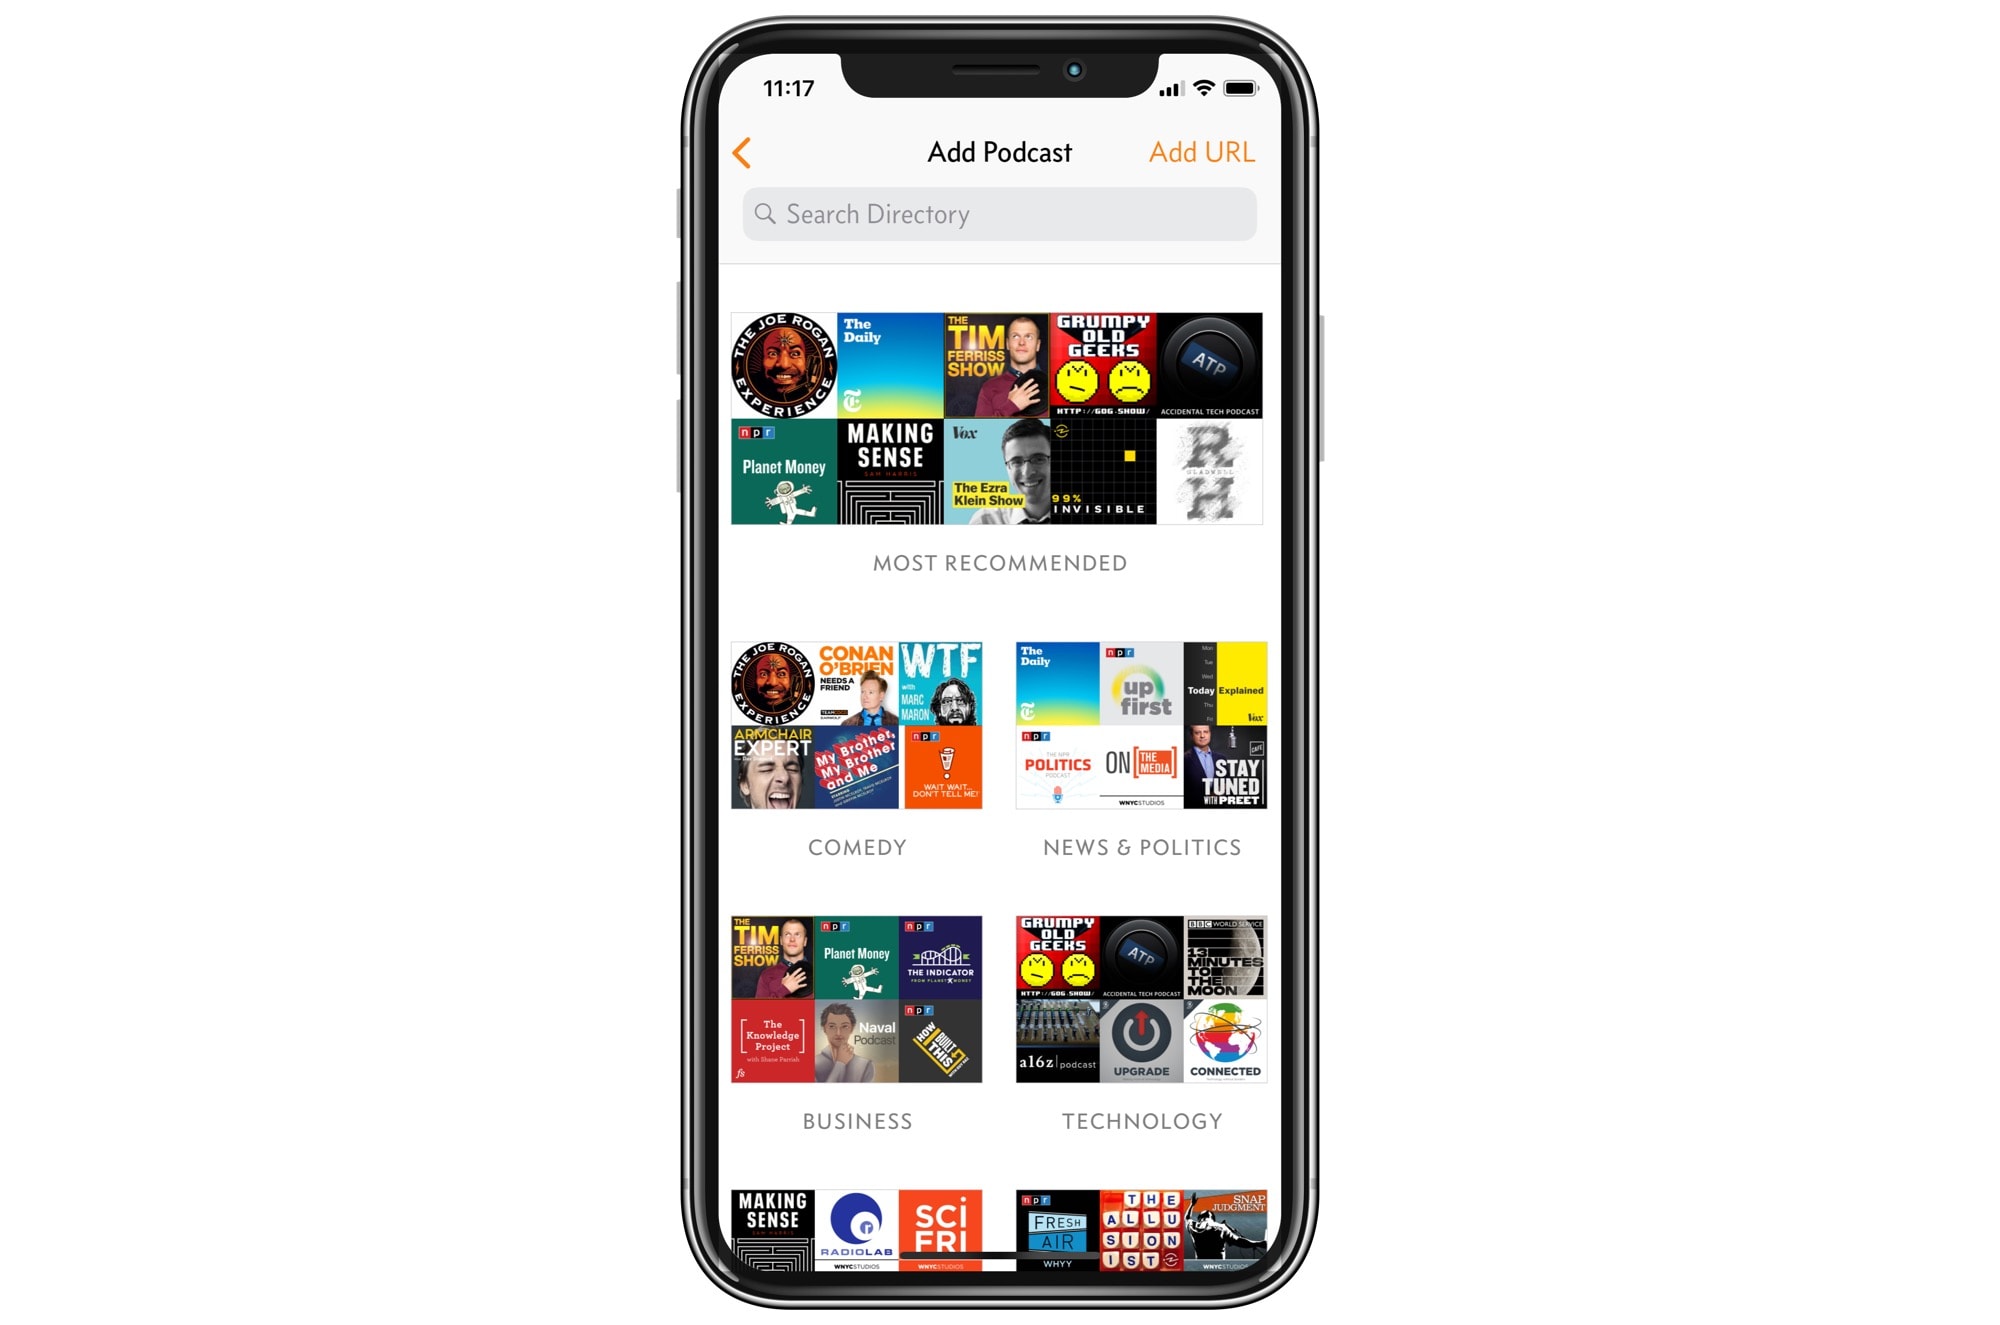 Overcast podcast recommendations are grouped by genre.